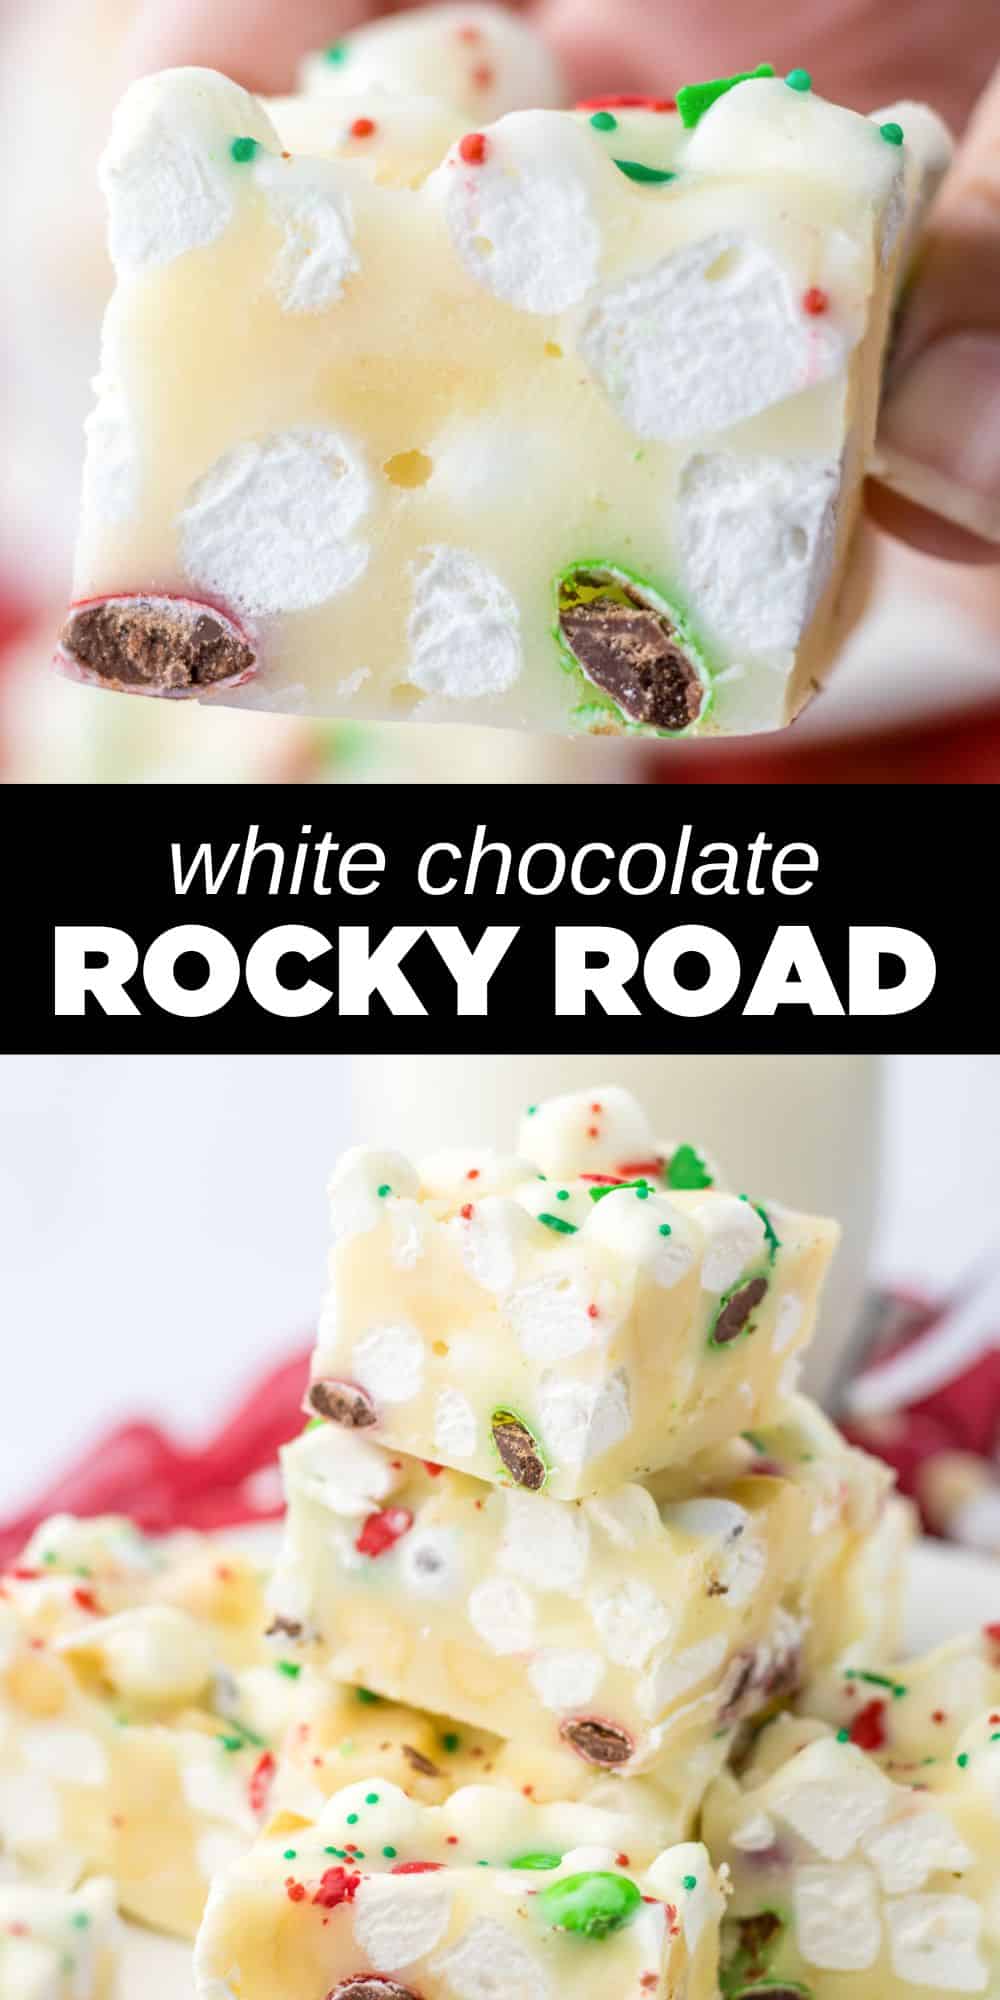 These Christmas Rocky Road Candy is the best, so delicious and festive! White chocolate combines with butter and peppermint extract to create a creamy base for mini marshmallows, candies and macadamia nuts. This is the perfect Christmas treat to serve at parties or give away as gifts.